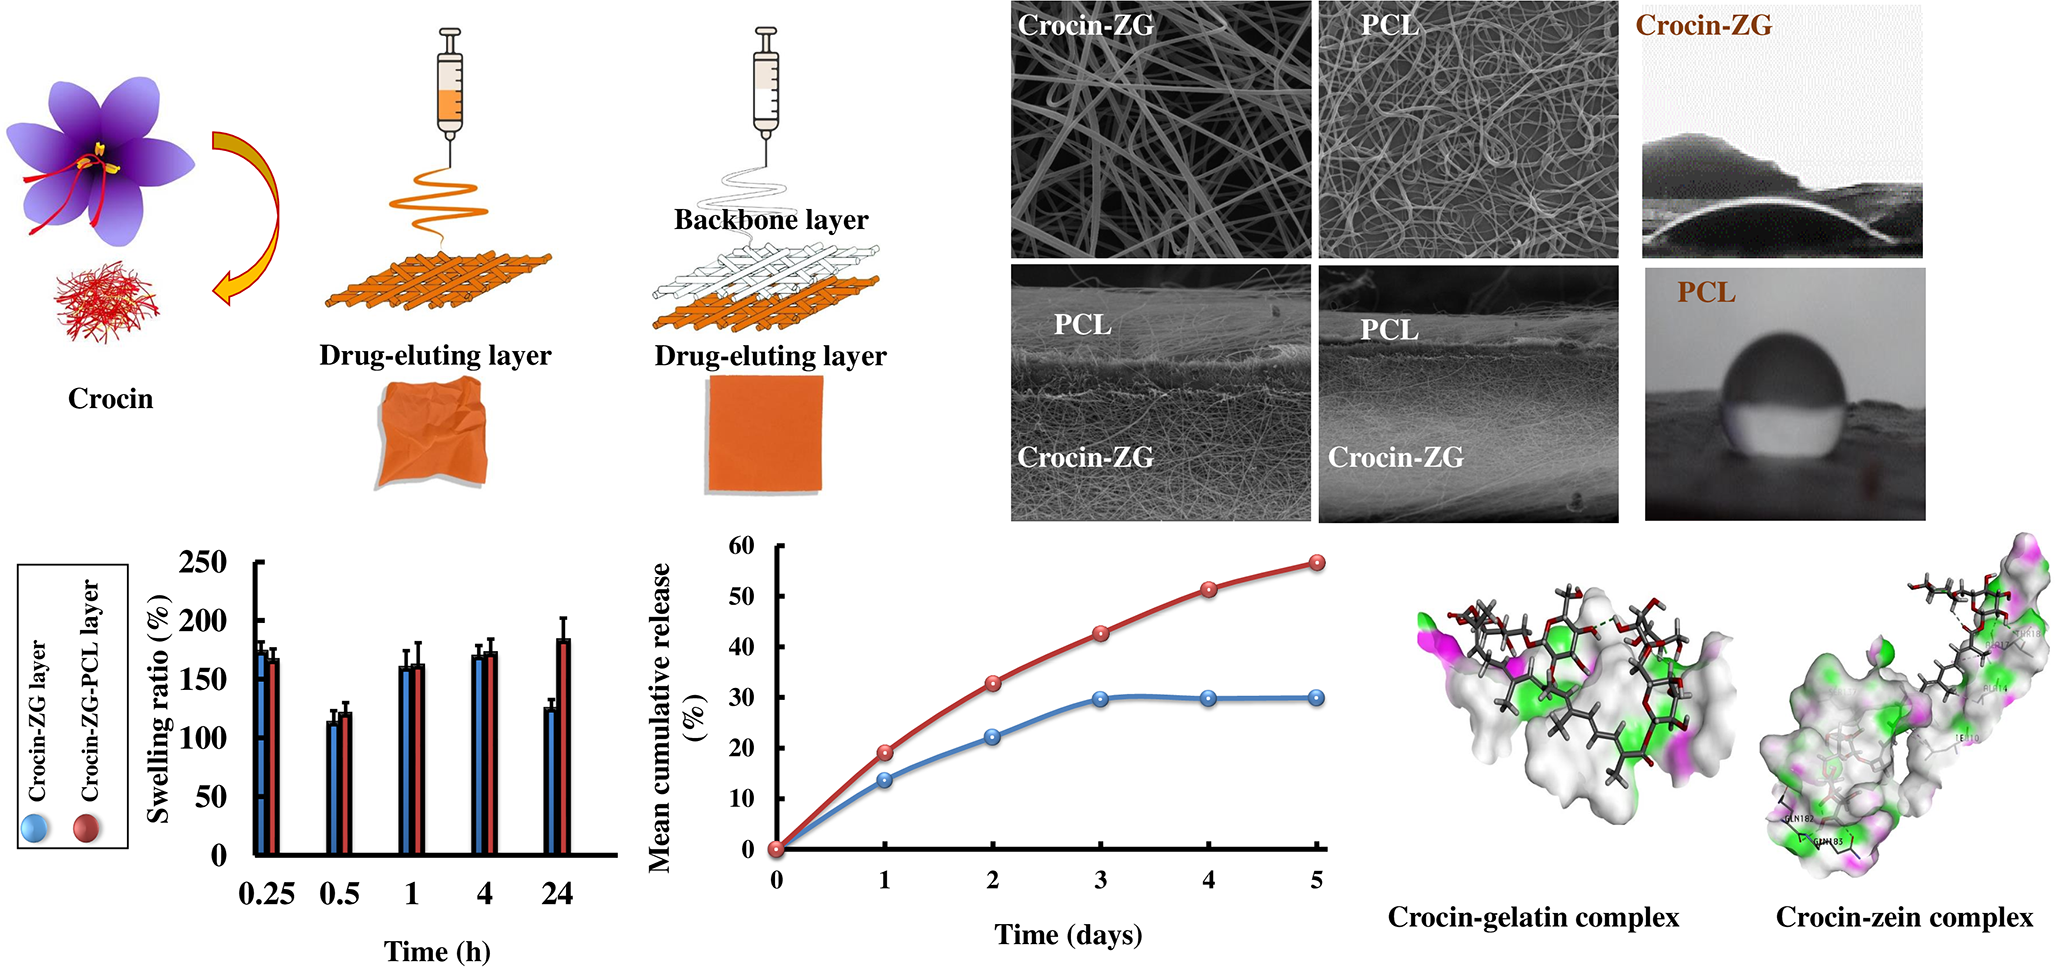 Fabrication, Physicochemical Characterization, and in Silico Evaluation of Bilayer Nanofibers as a Potential Sustained Crocin Delivery Dressing